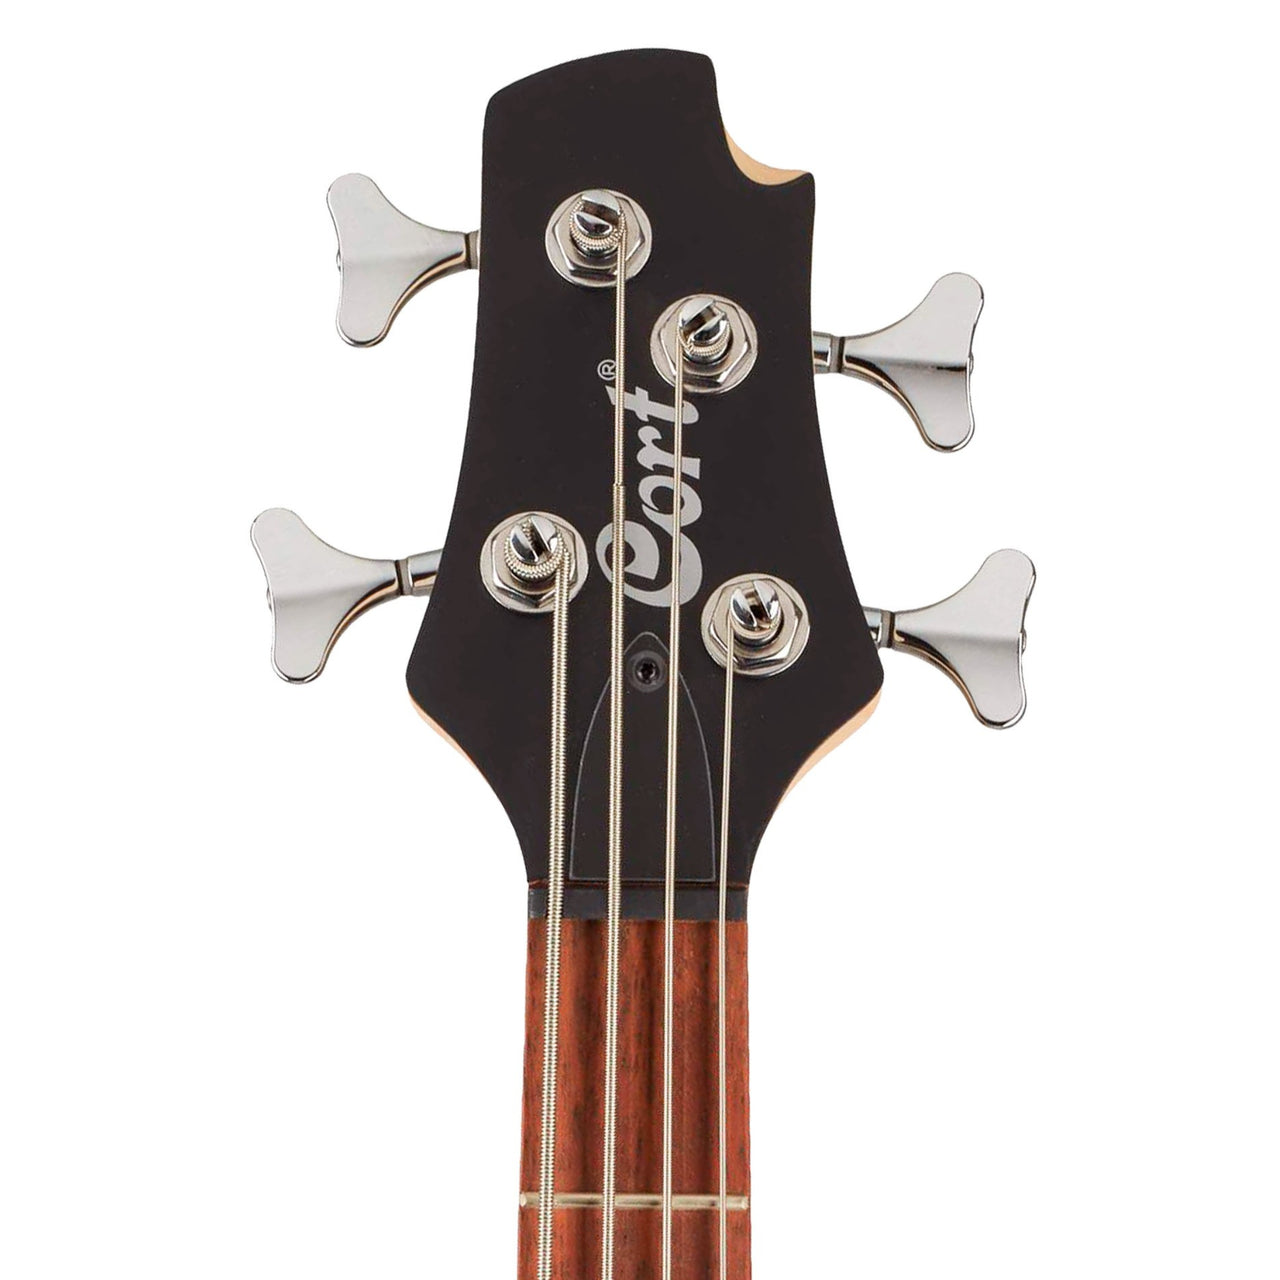 Bajo Electrico Cort "action Bass" Negro, Action Bass Plus Bk